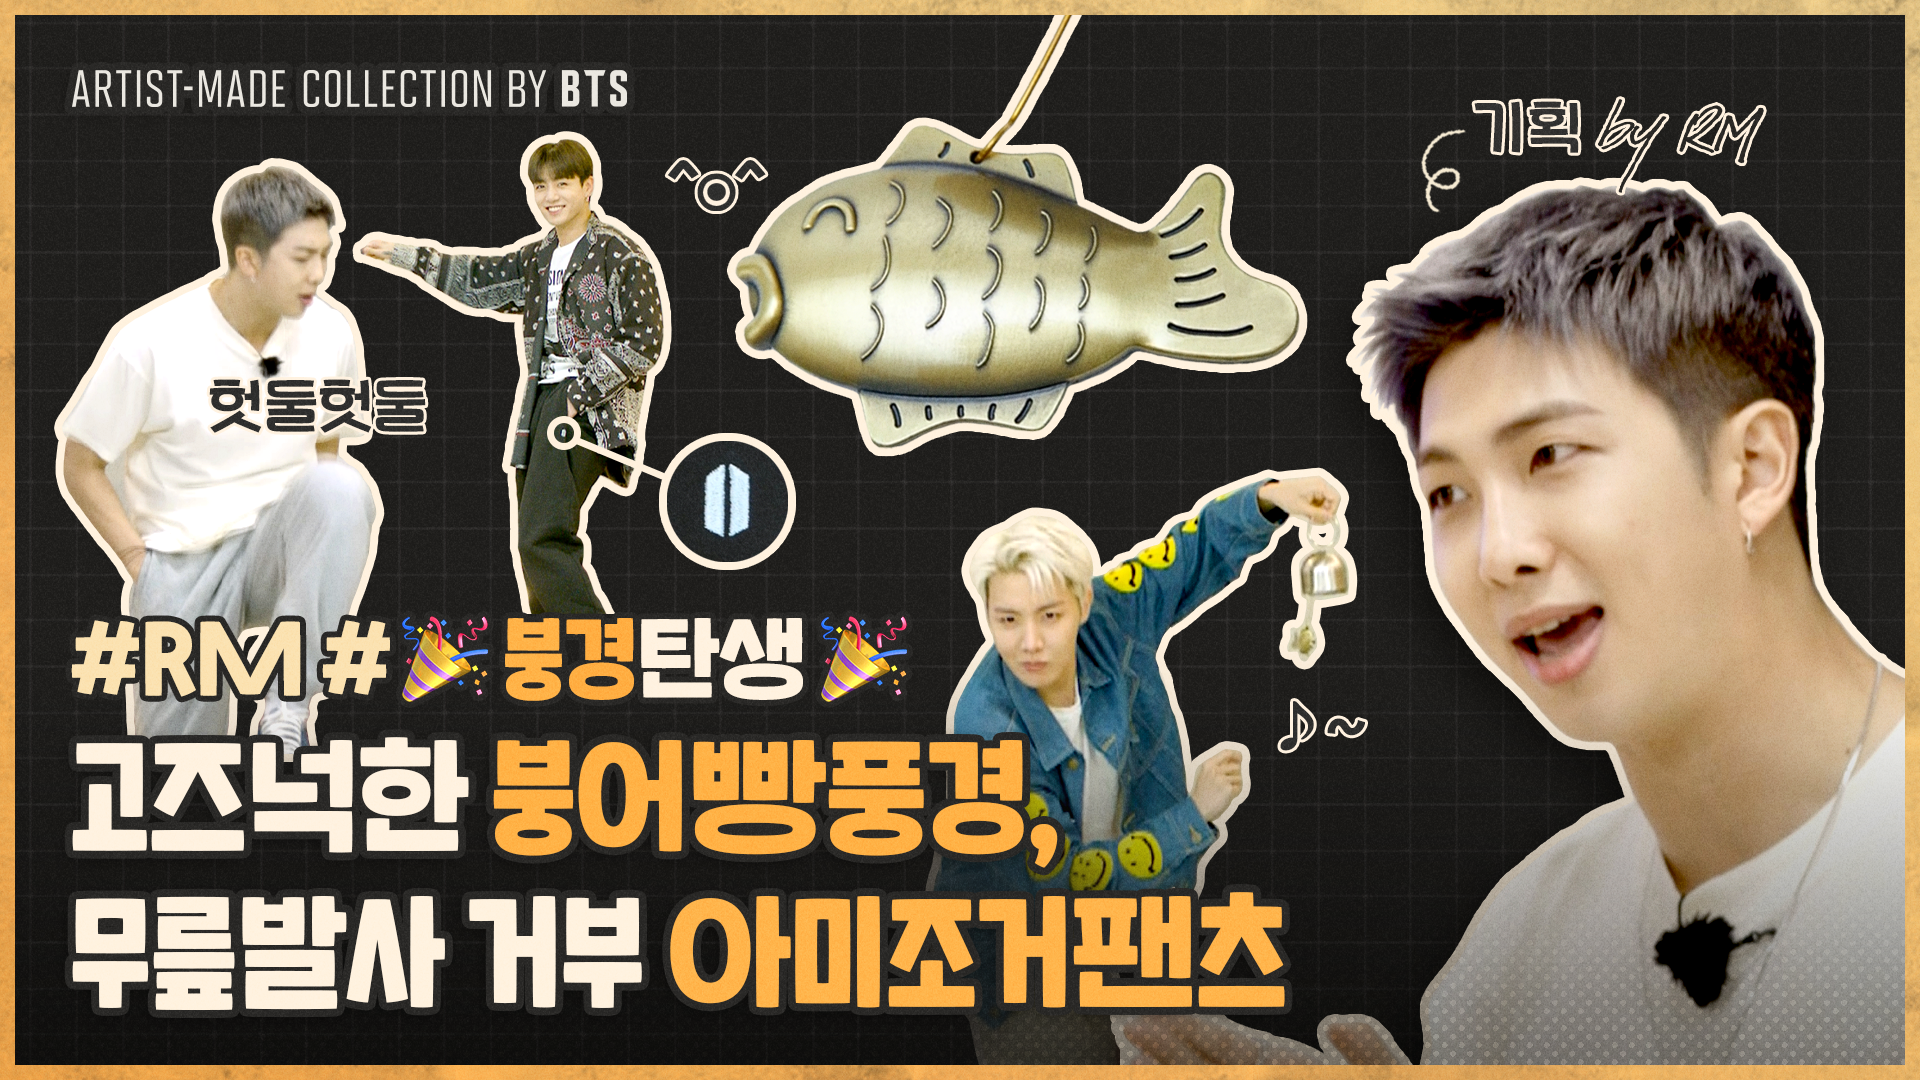 ARTIST-MADE COLLECTION 'SHOW' BY BTS - RM(with SUGA, j-hope, Jung